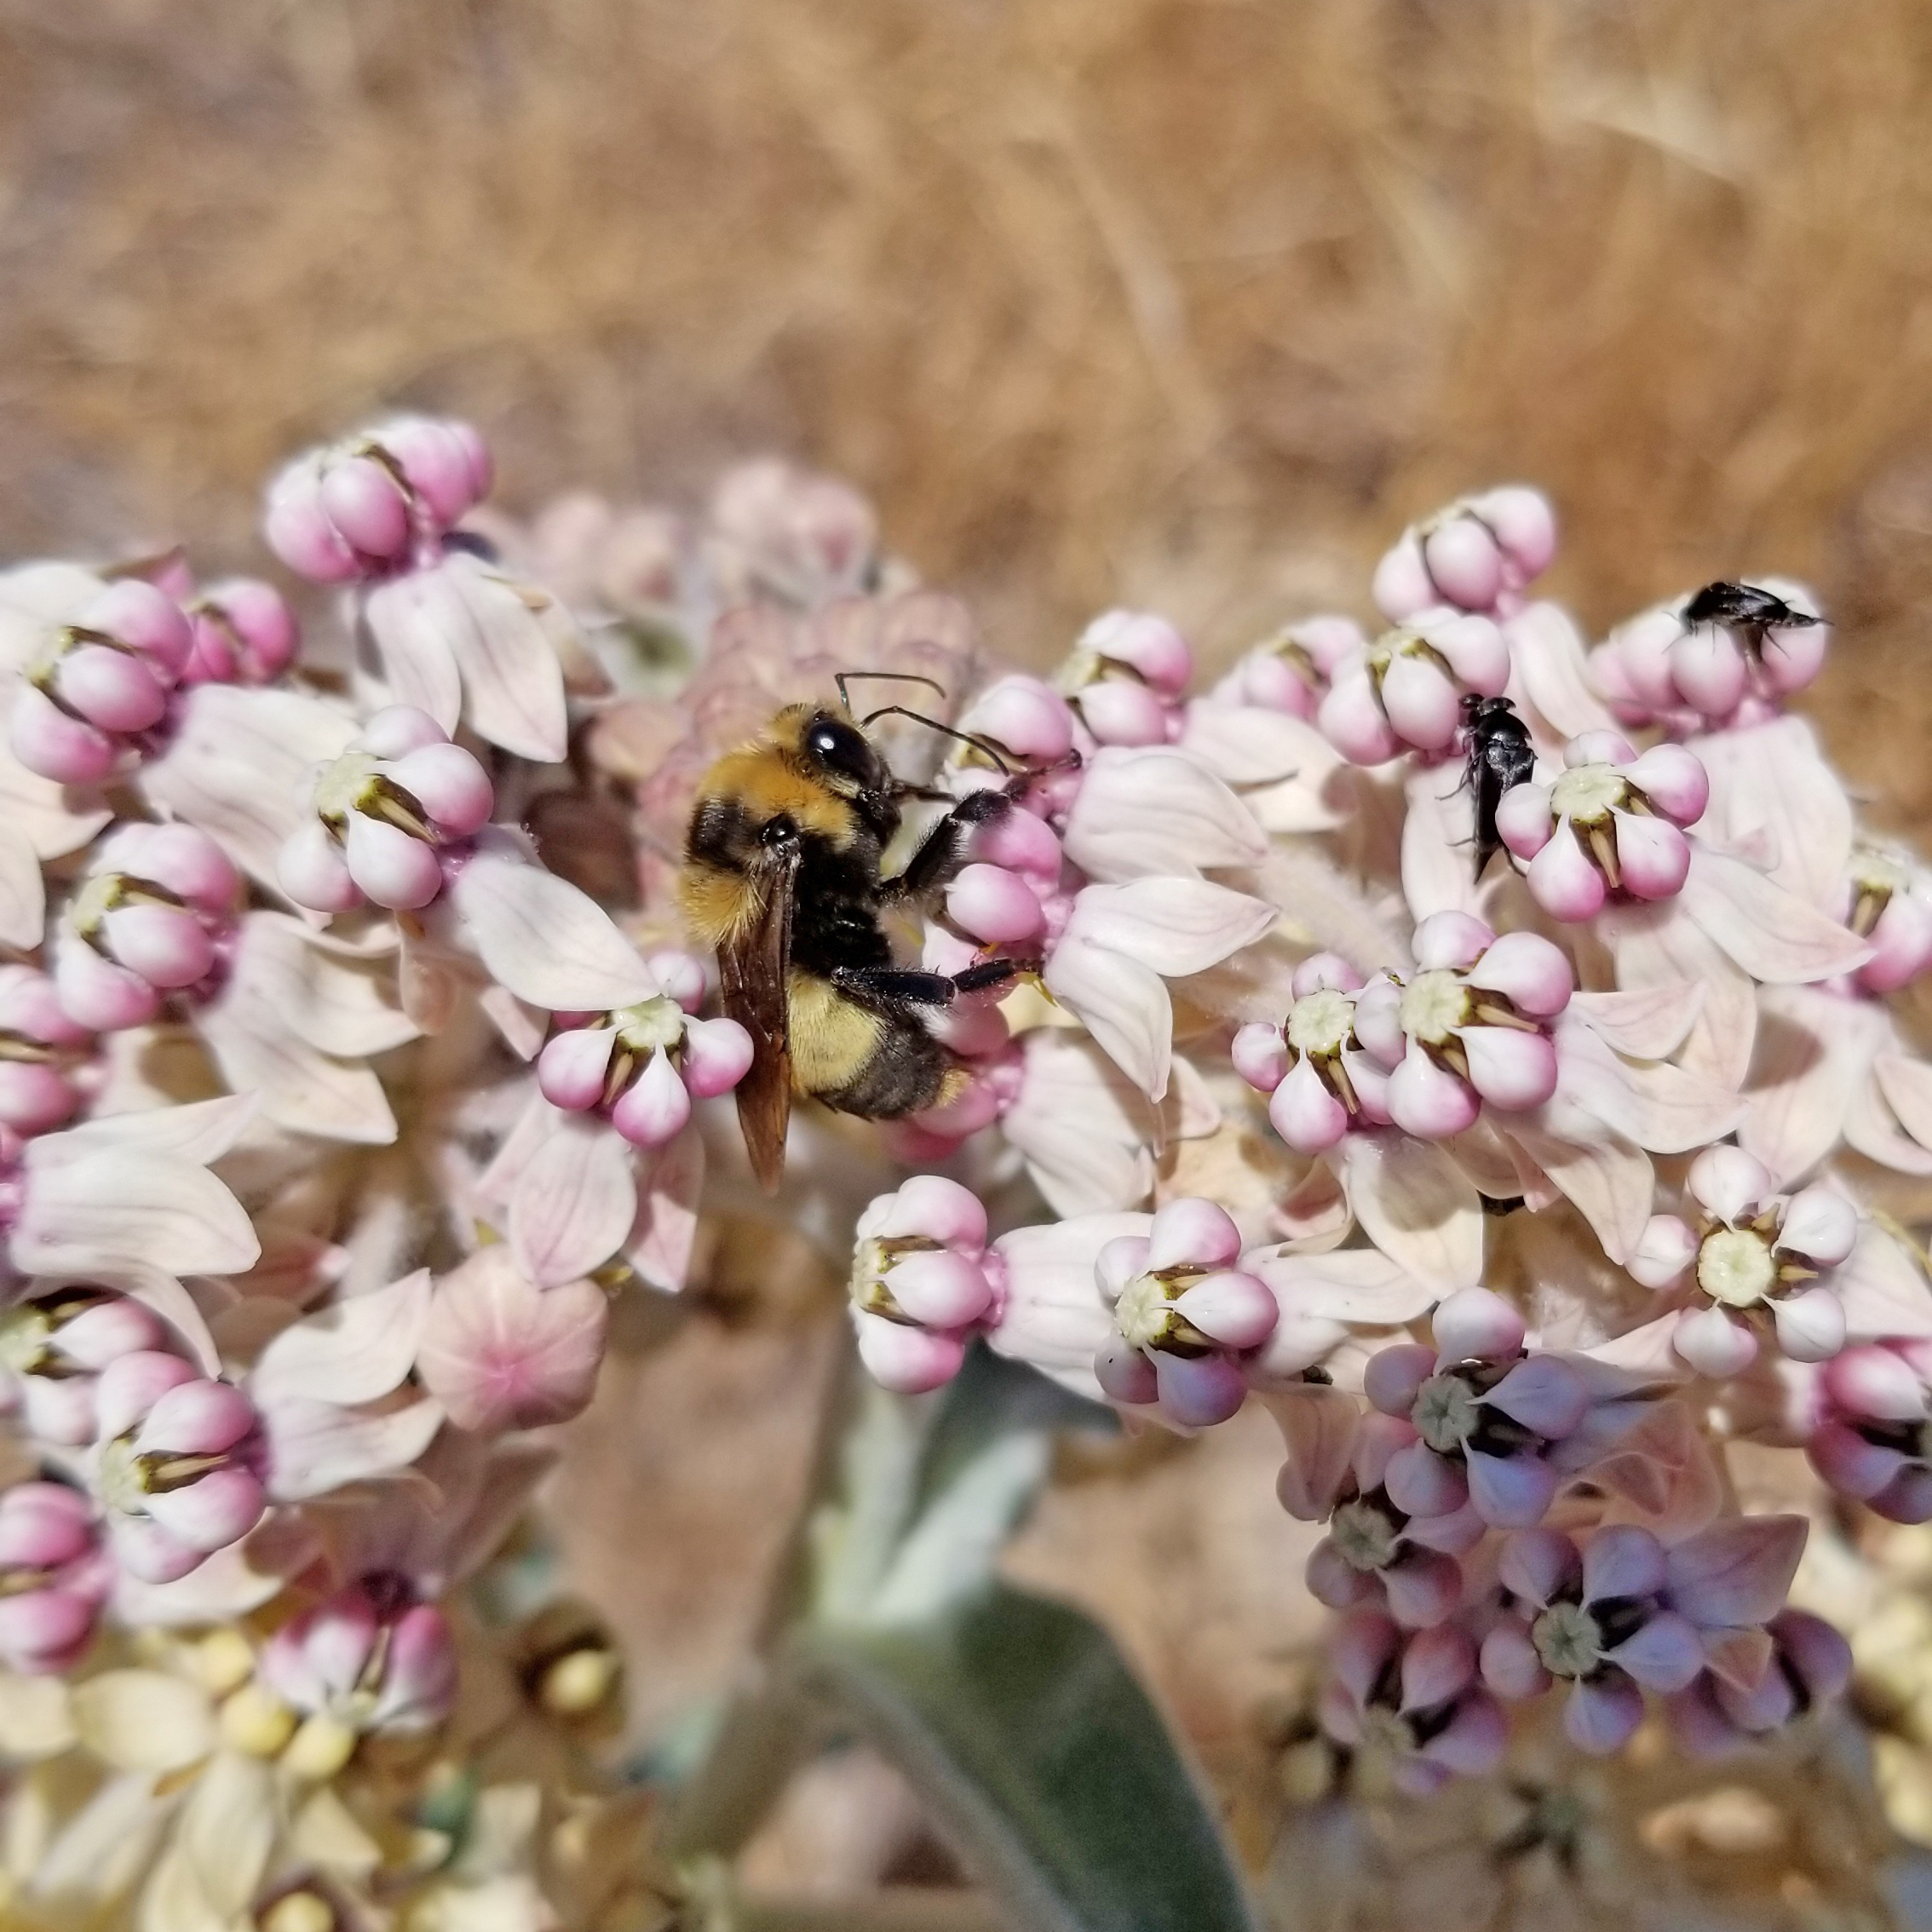 Crotch's bumble bee drinking nectar from milkweed flowers